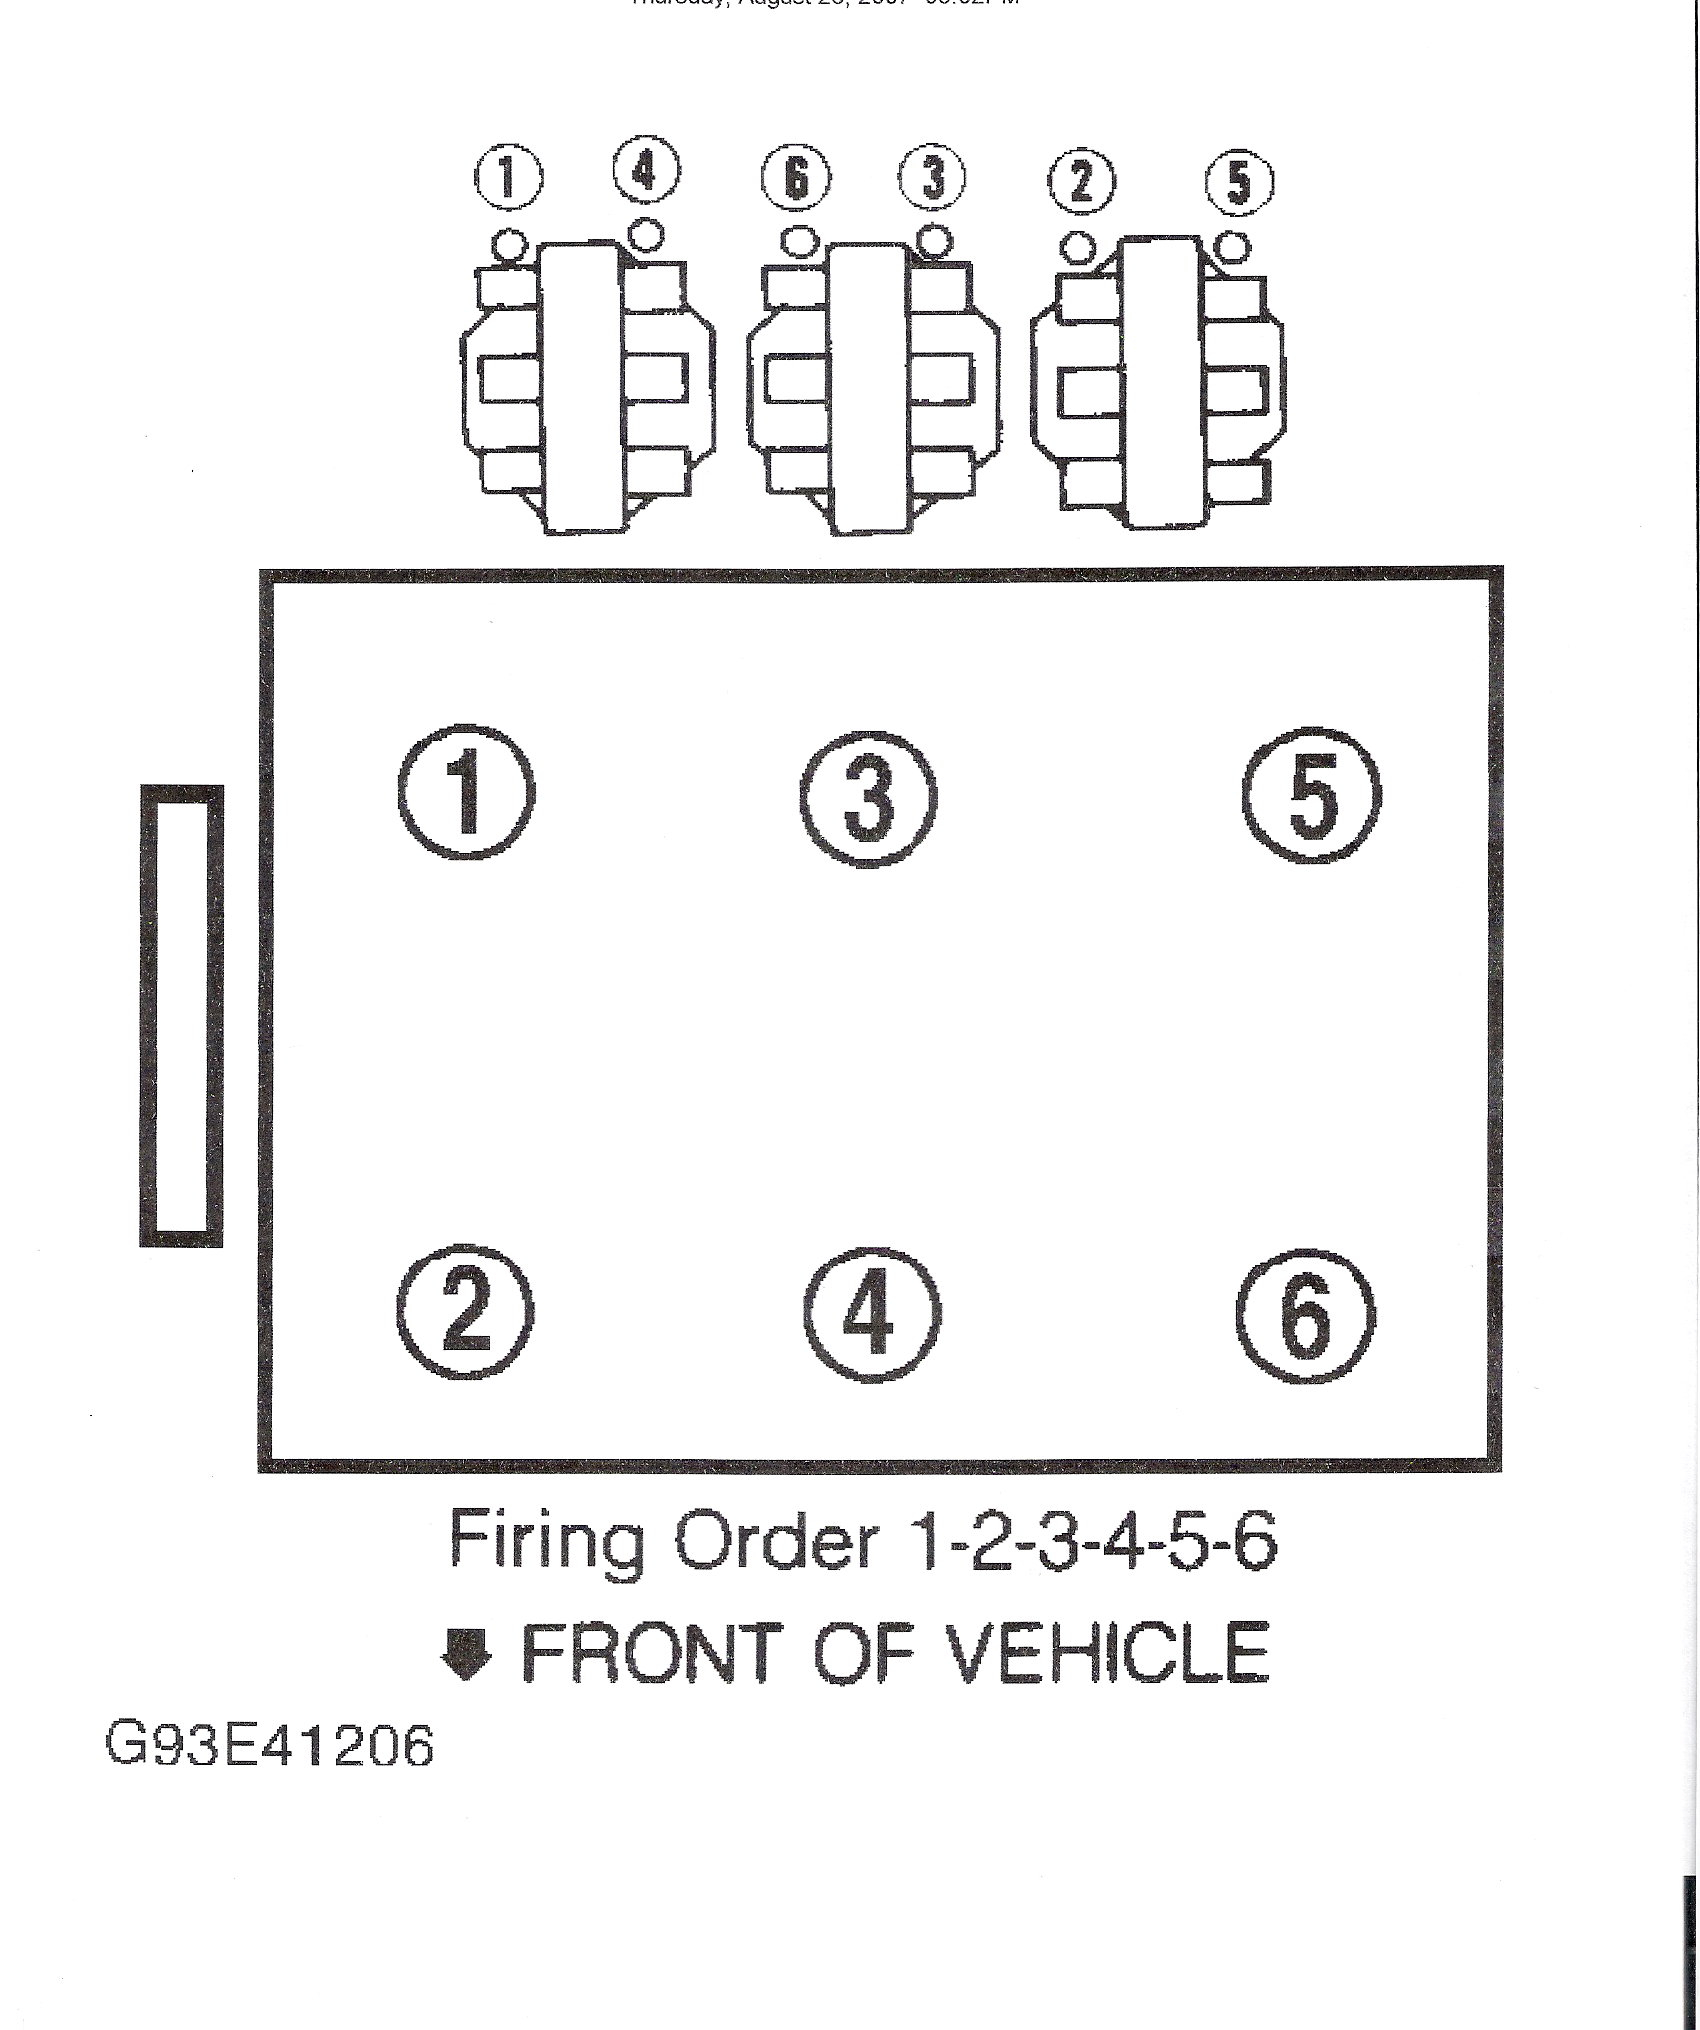 Firing Order For A 1999 Buick Century 3.1